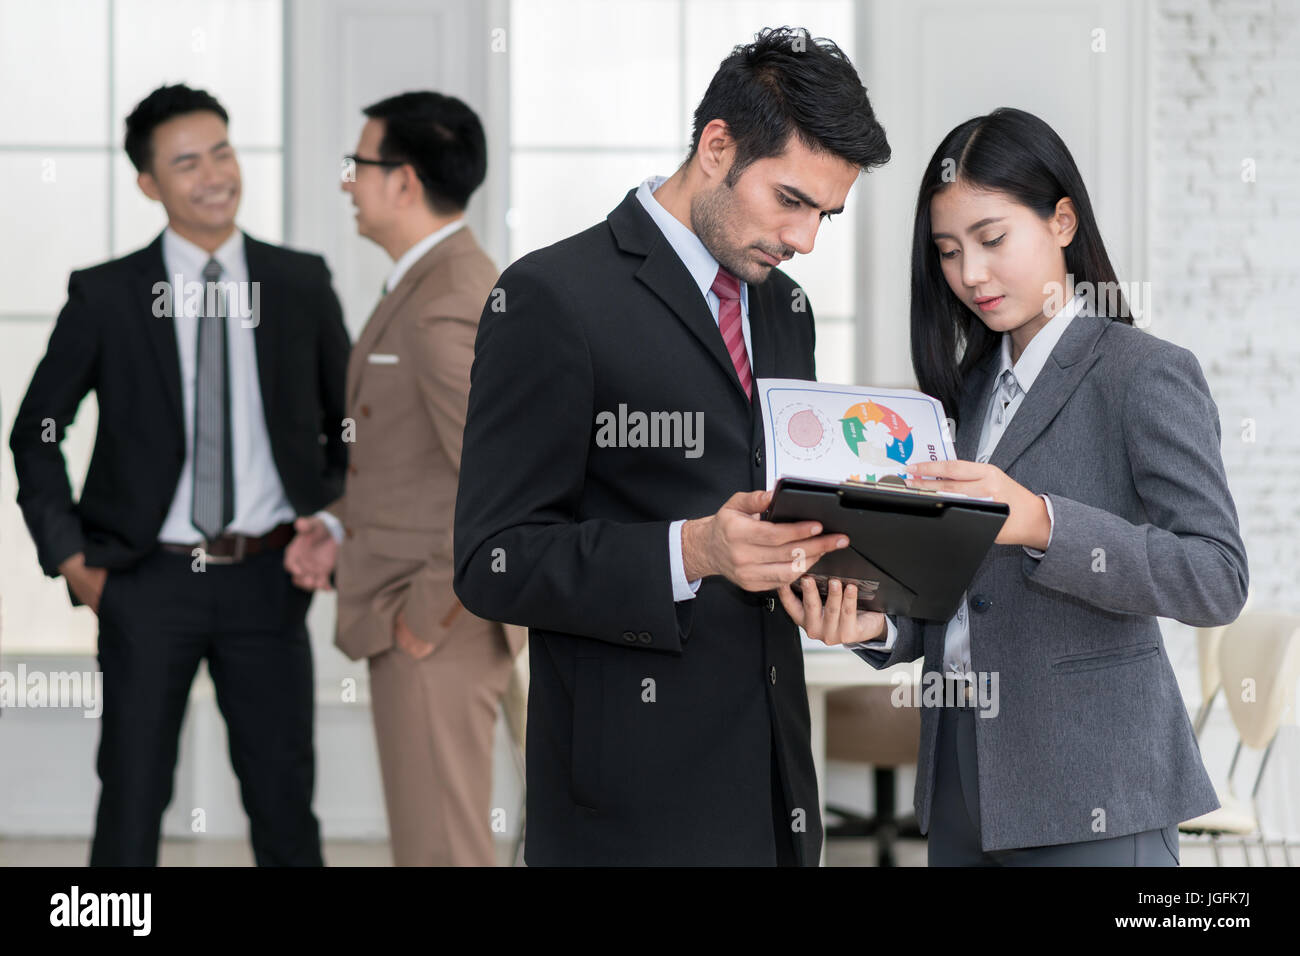 Group of muti Ethnicity business team meeting discussion in moddren office. Business team corporate organization meeting concept. Stock Photo